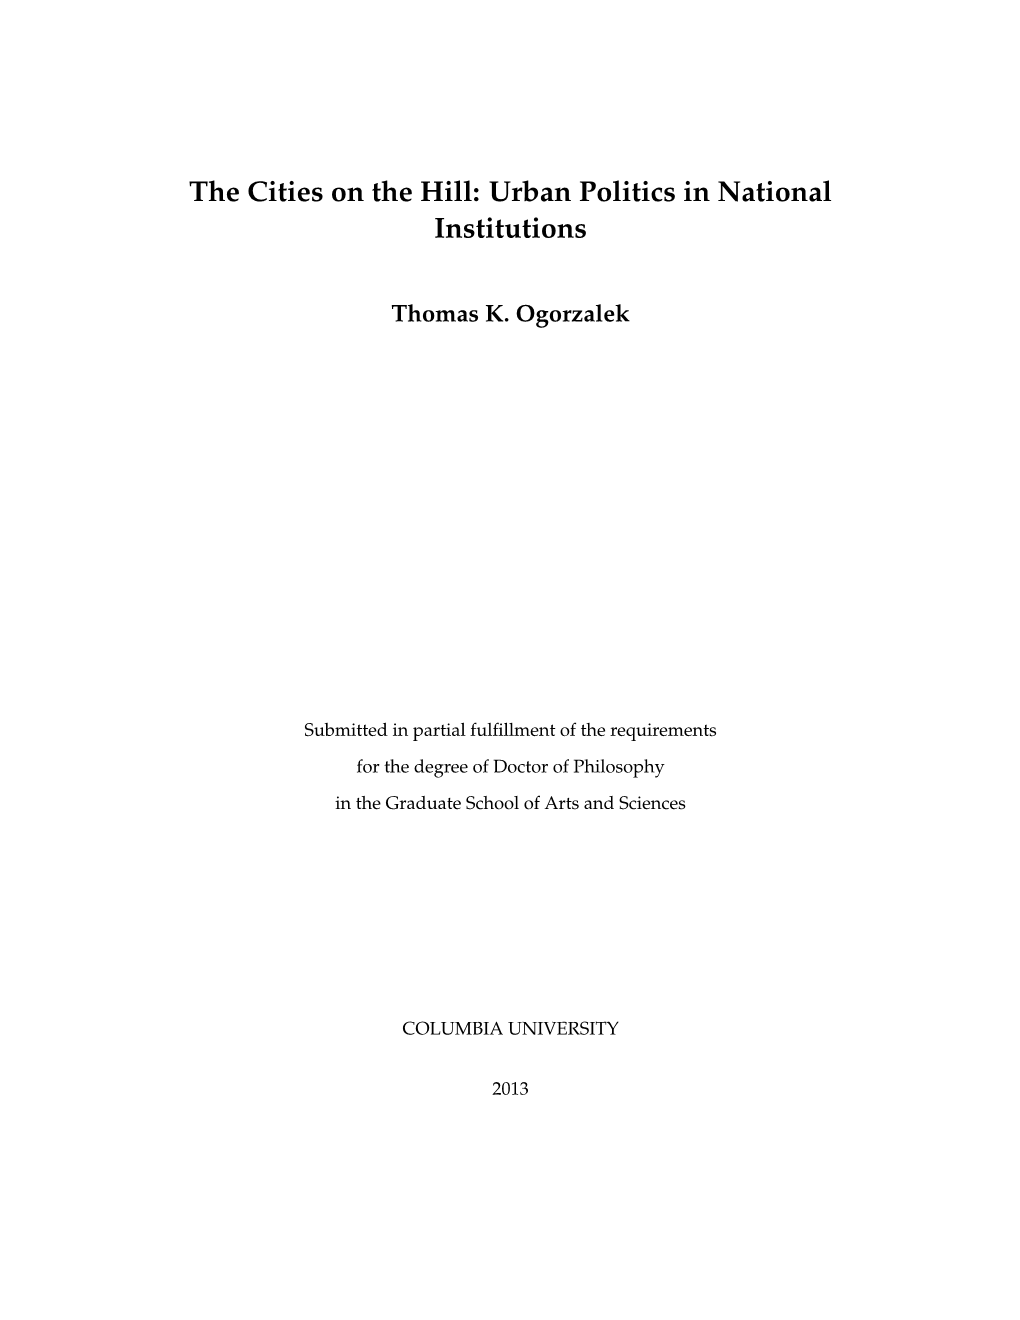 The Cities on the Hill: Urban Politics in National Institutions